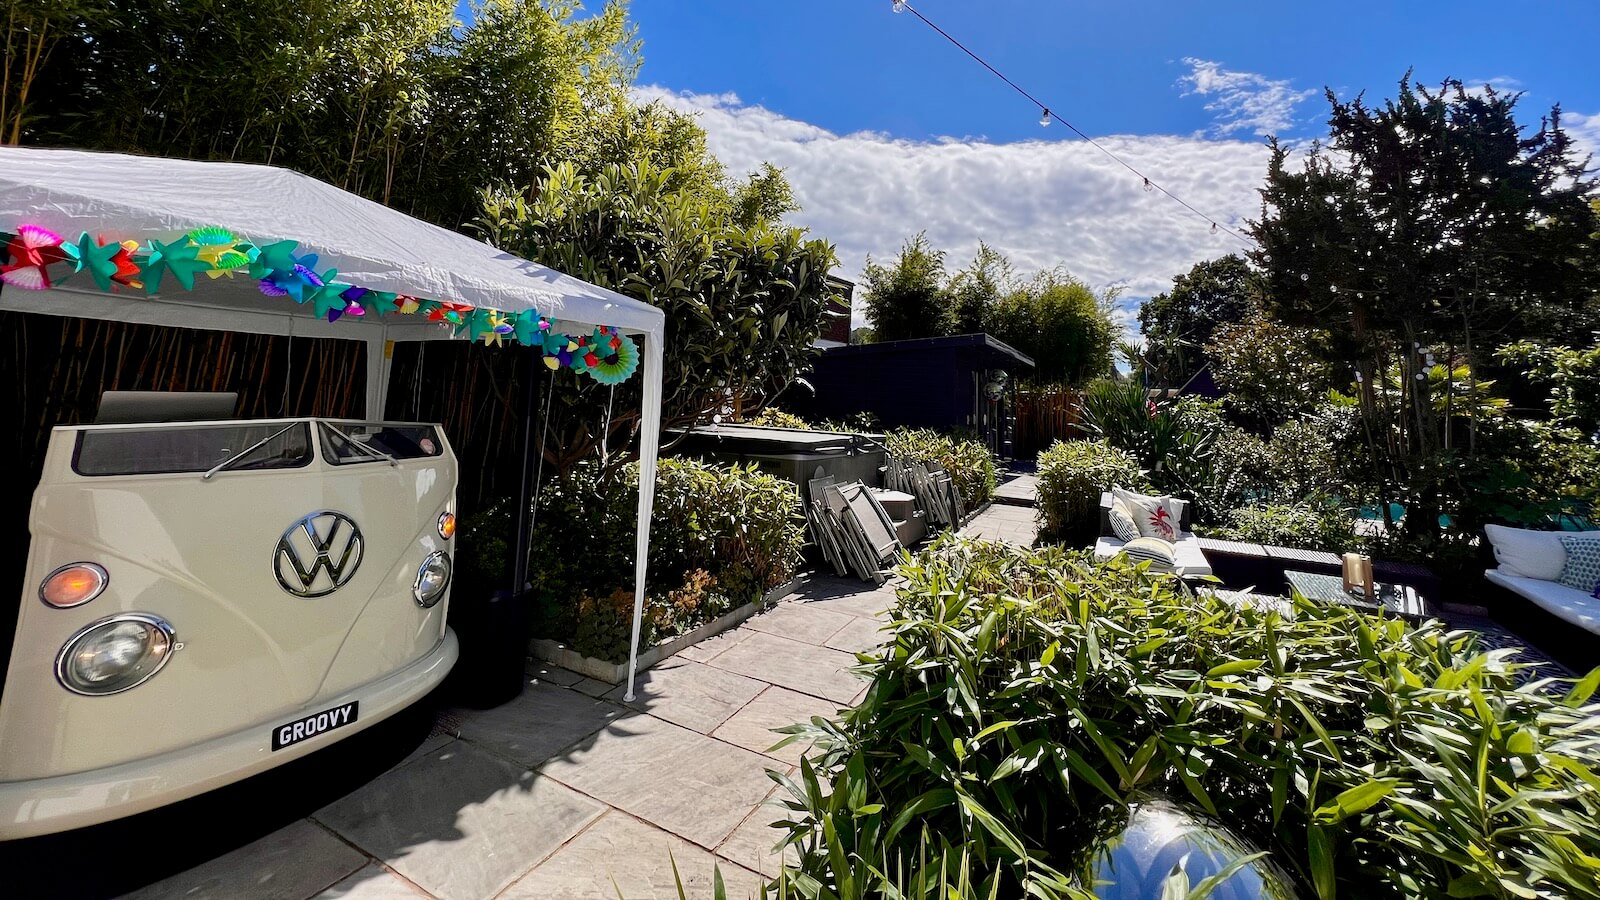 my unique VW DJ booth at Kirsty's garden party